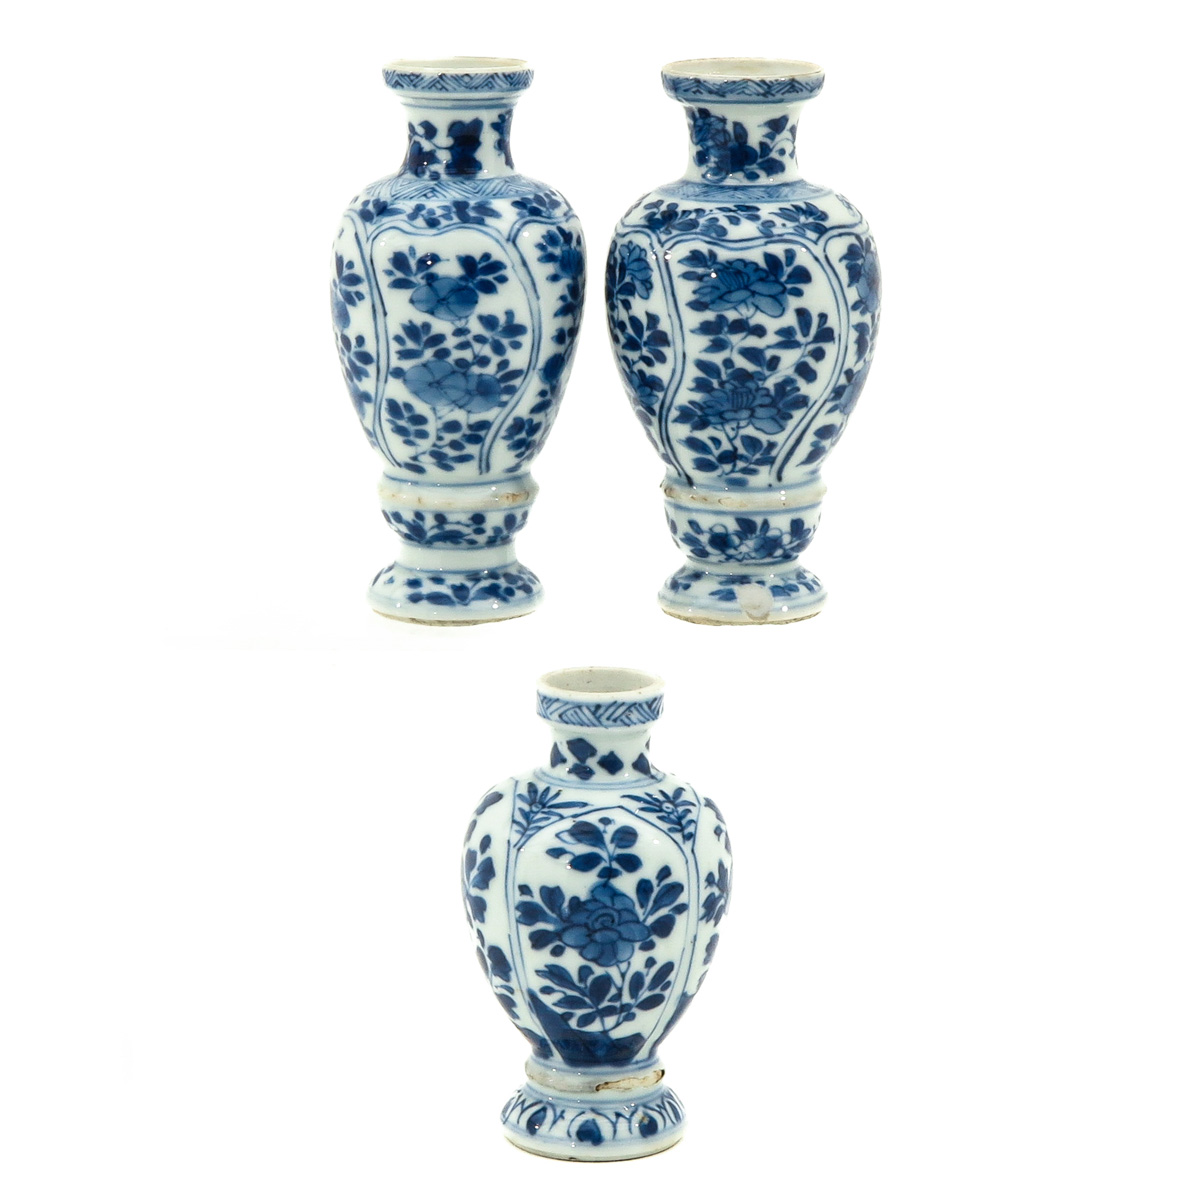 A Collection of 3 Miniature Vases